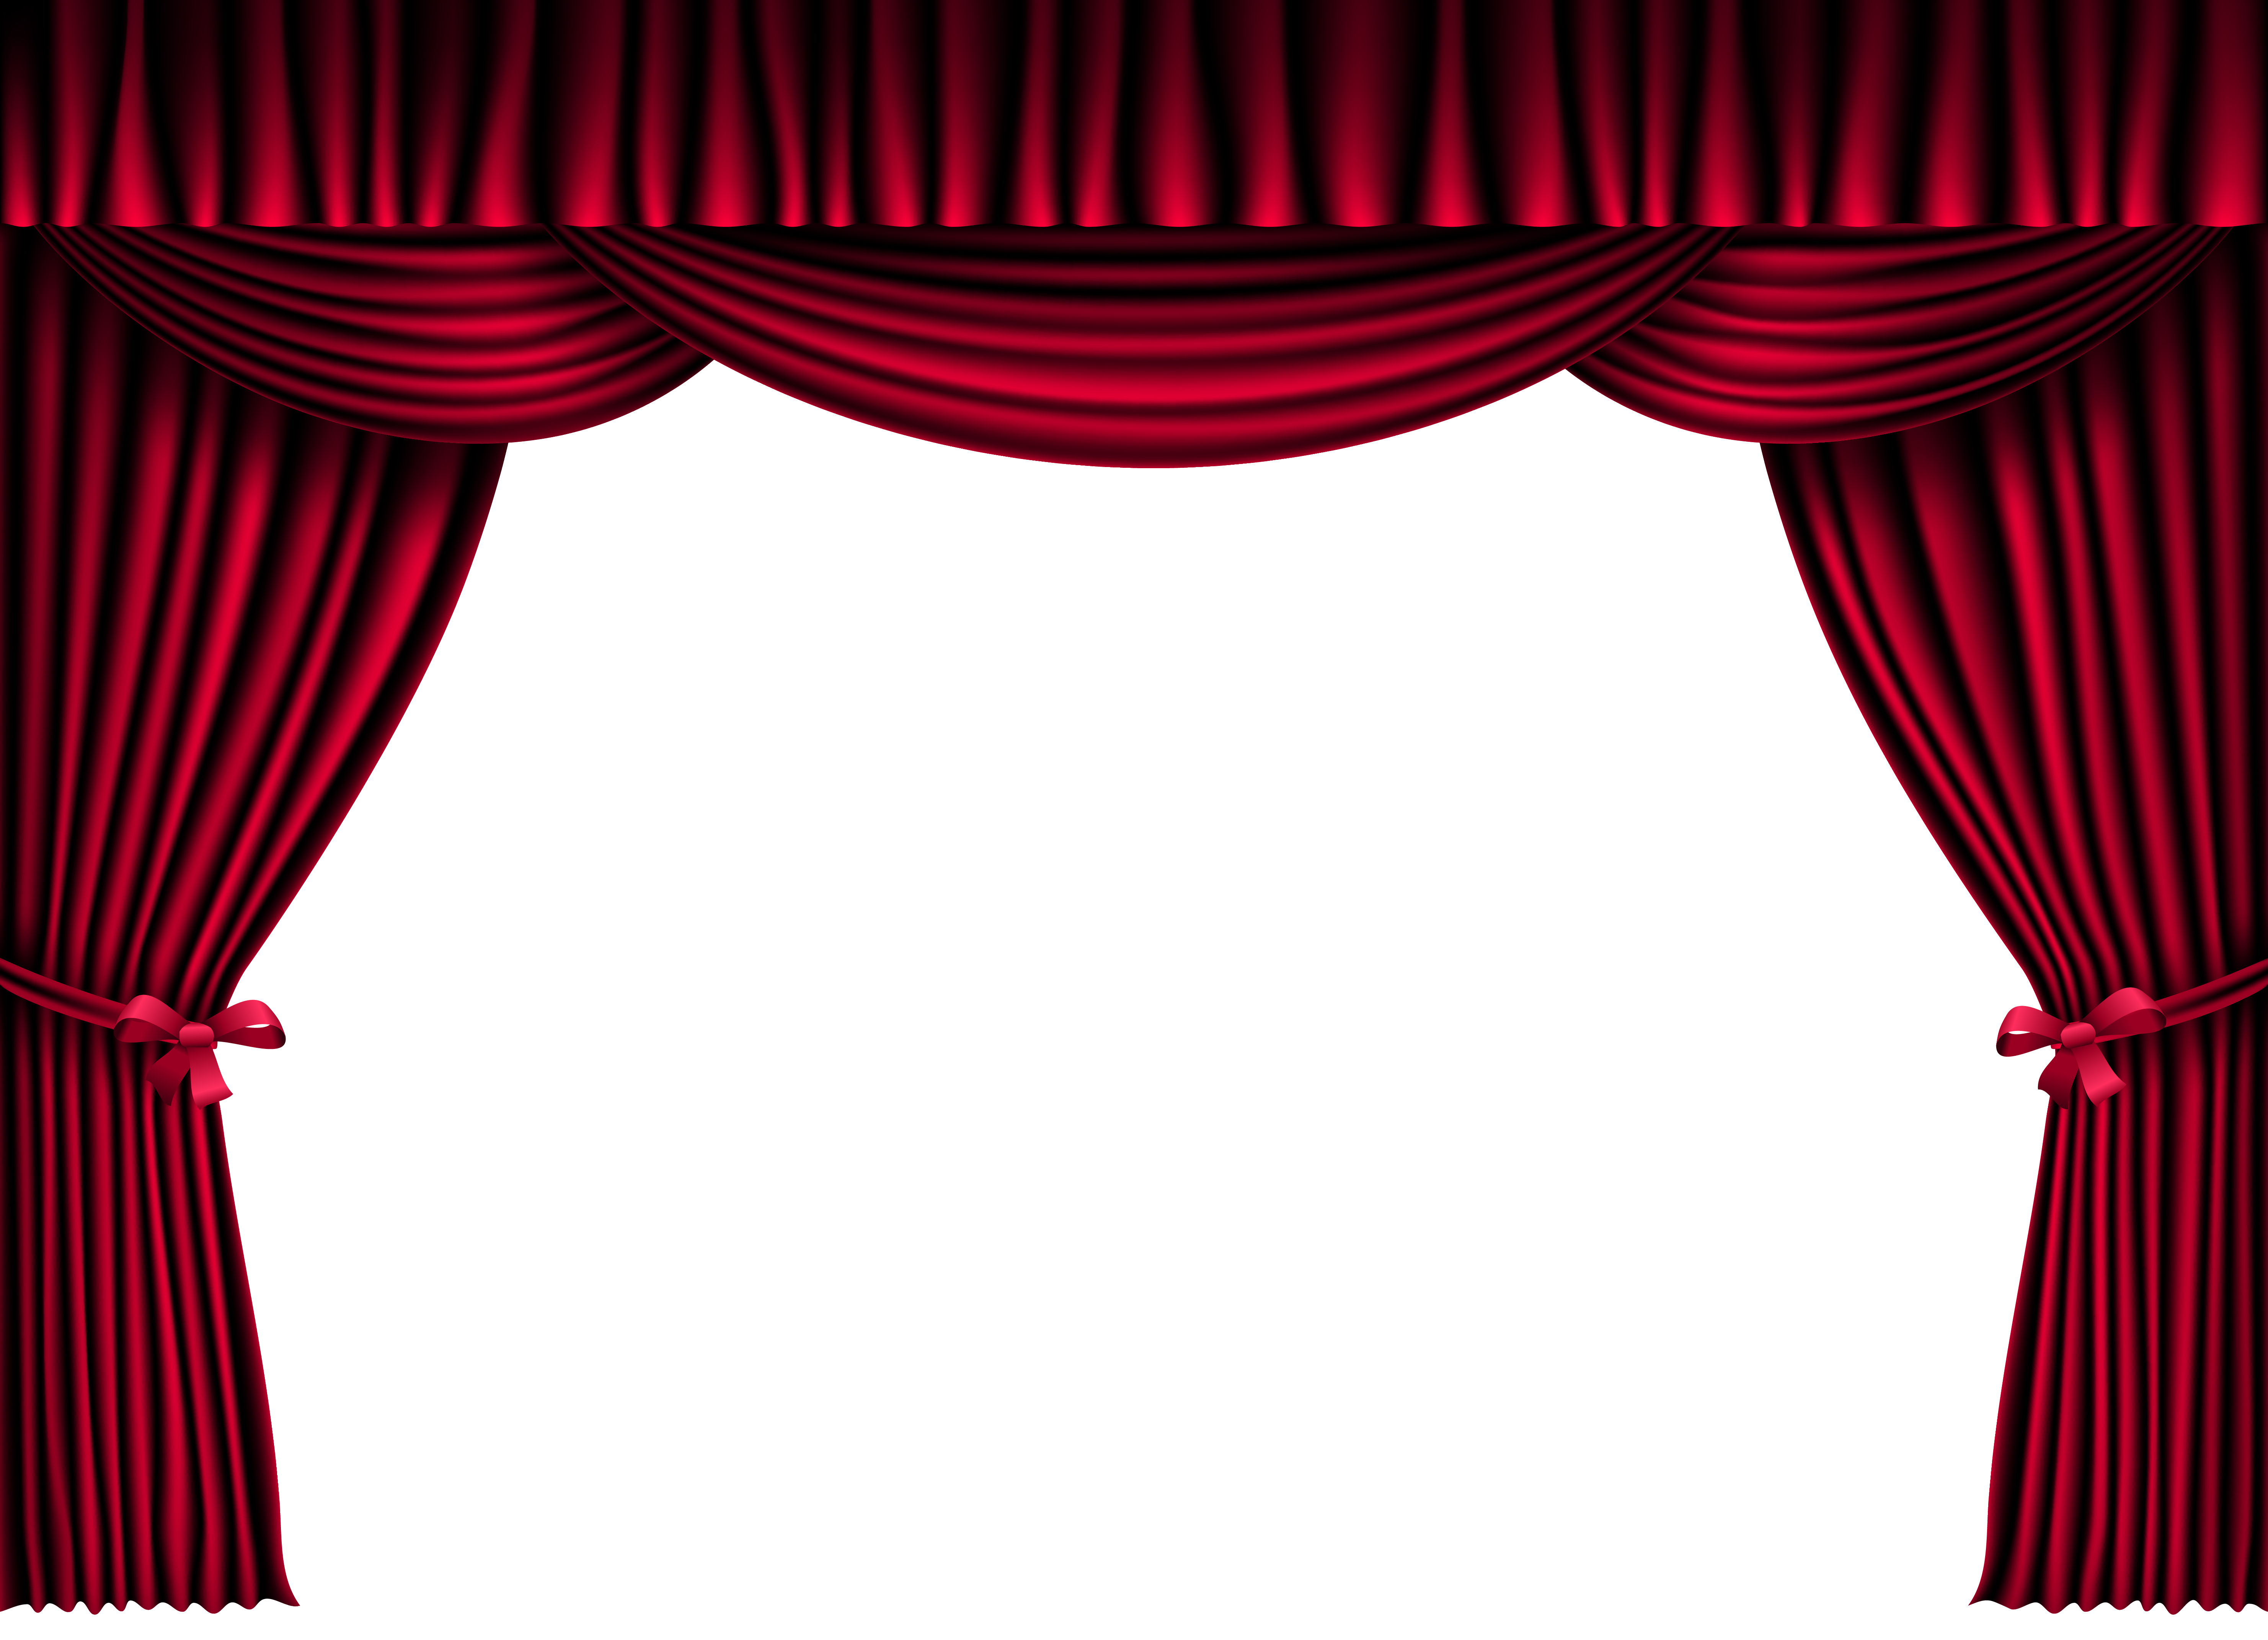 Curtains clipart bus. Red png image gallery